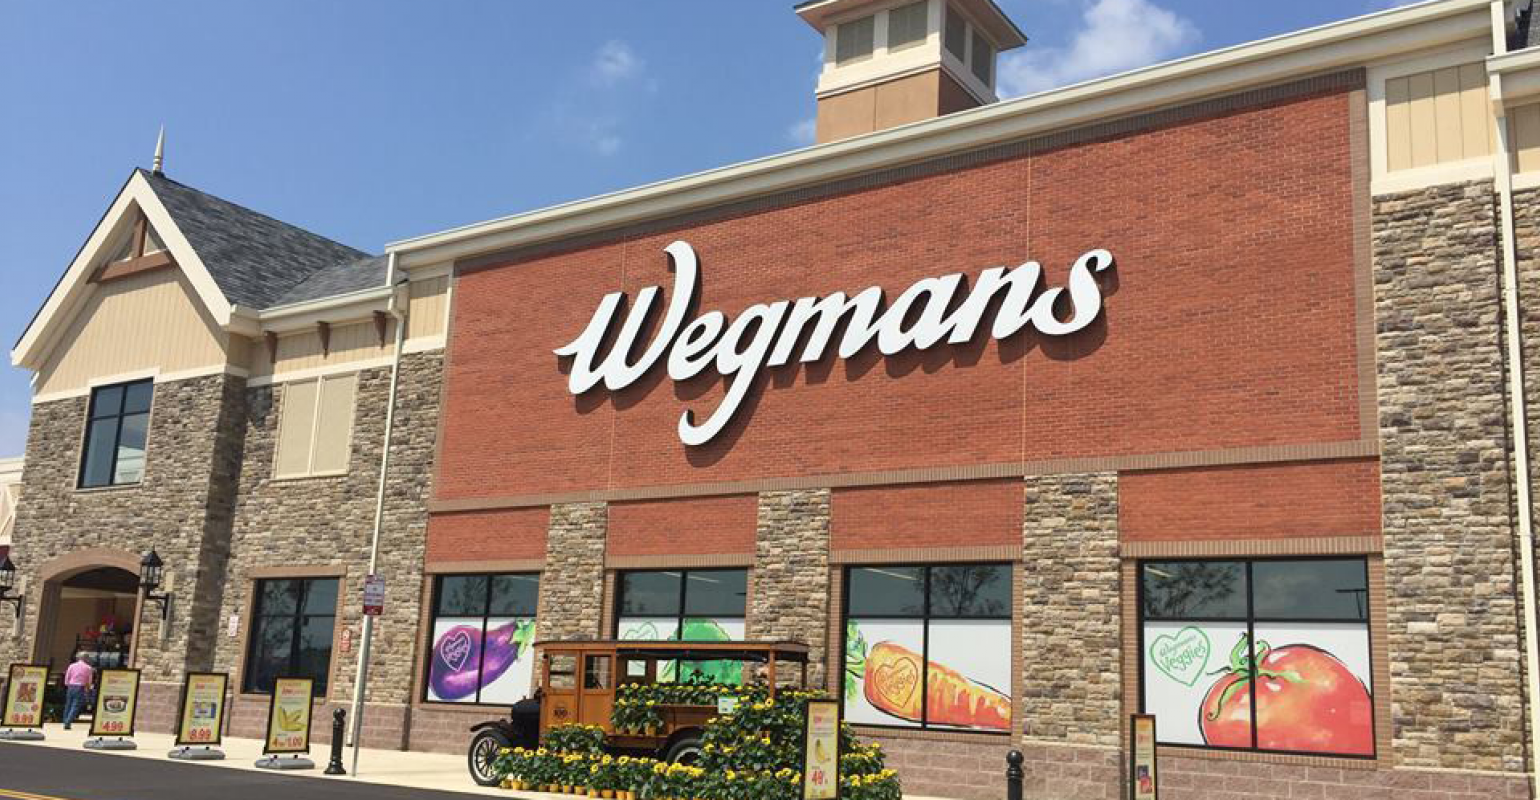 Find a Grocery Store Near You  Delivery and Curbside Available - Wegmans